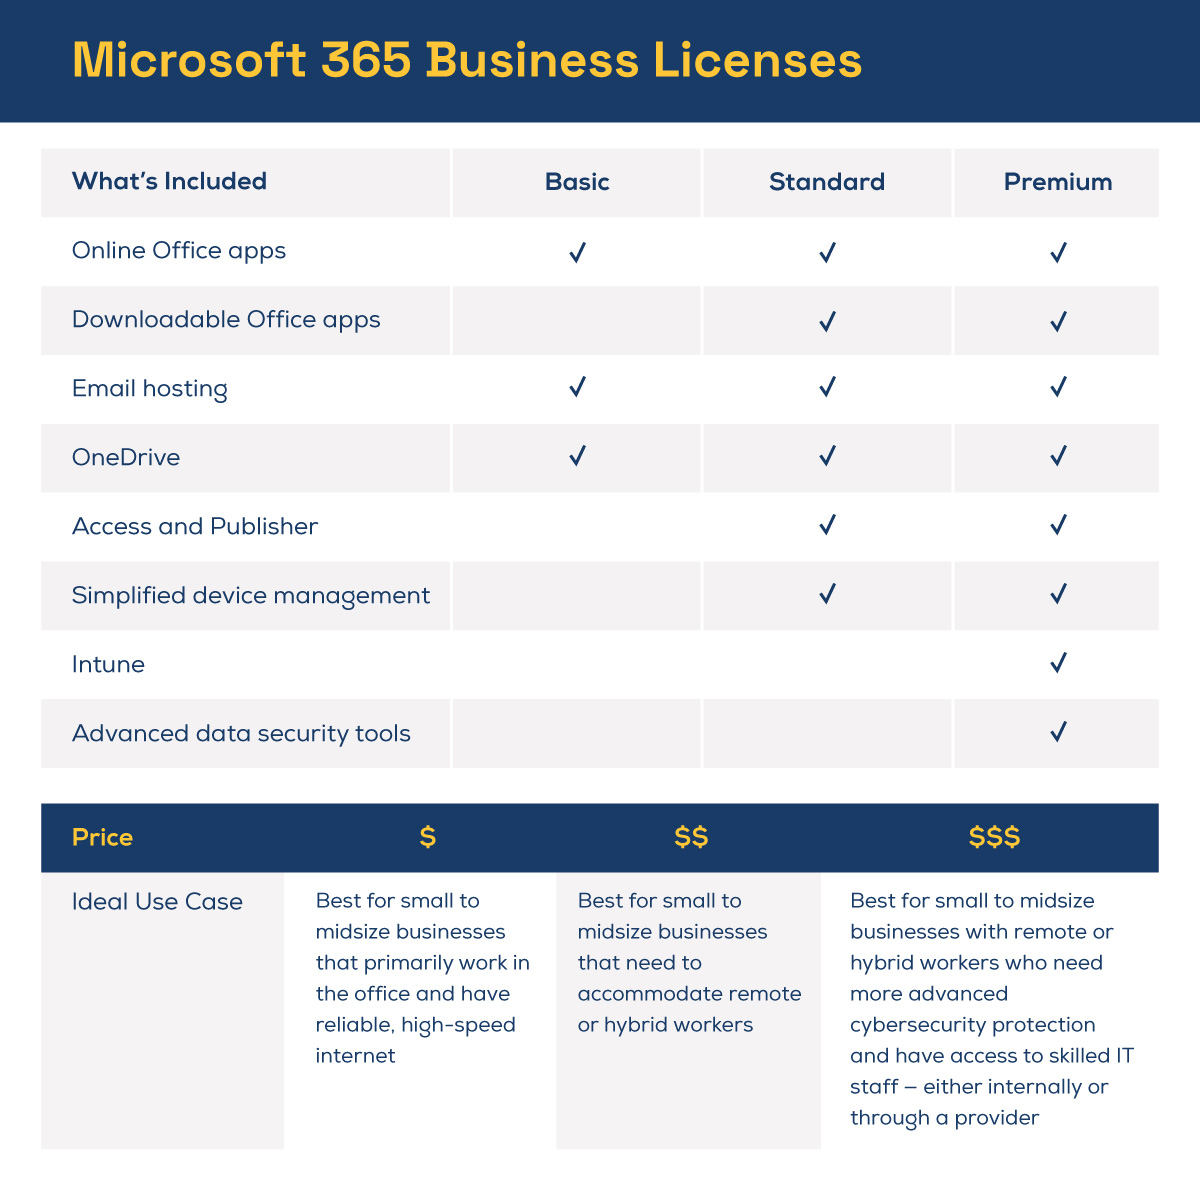 The various kinds of Microsoft 365 Business Licenses